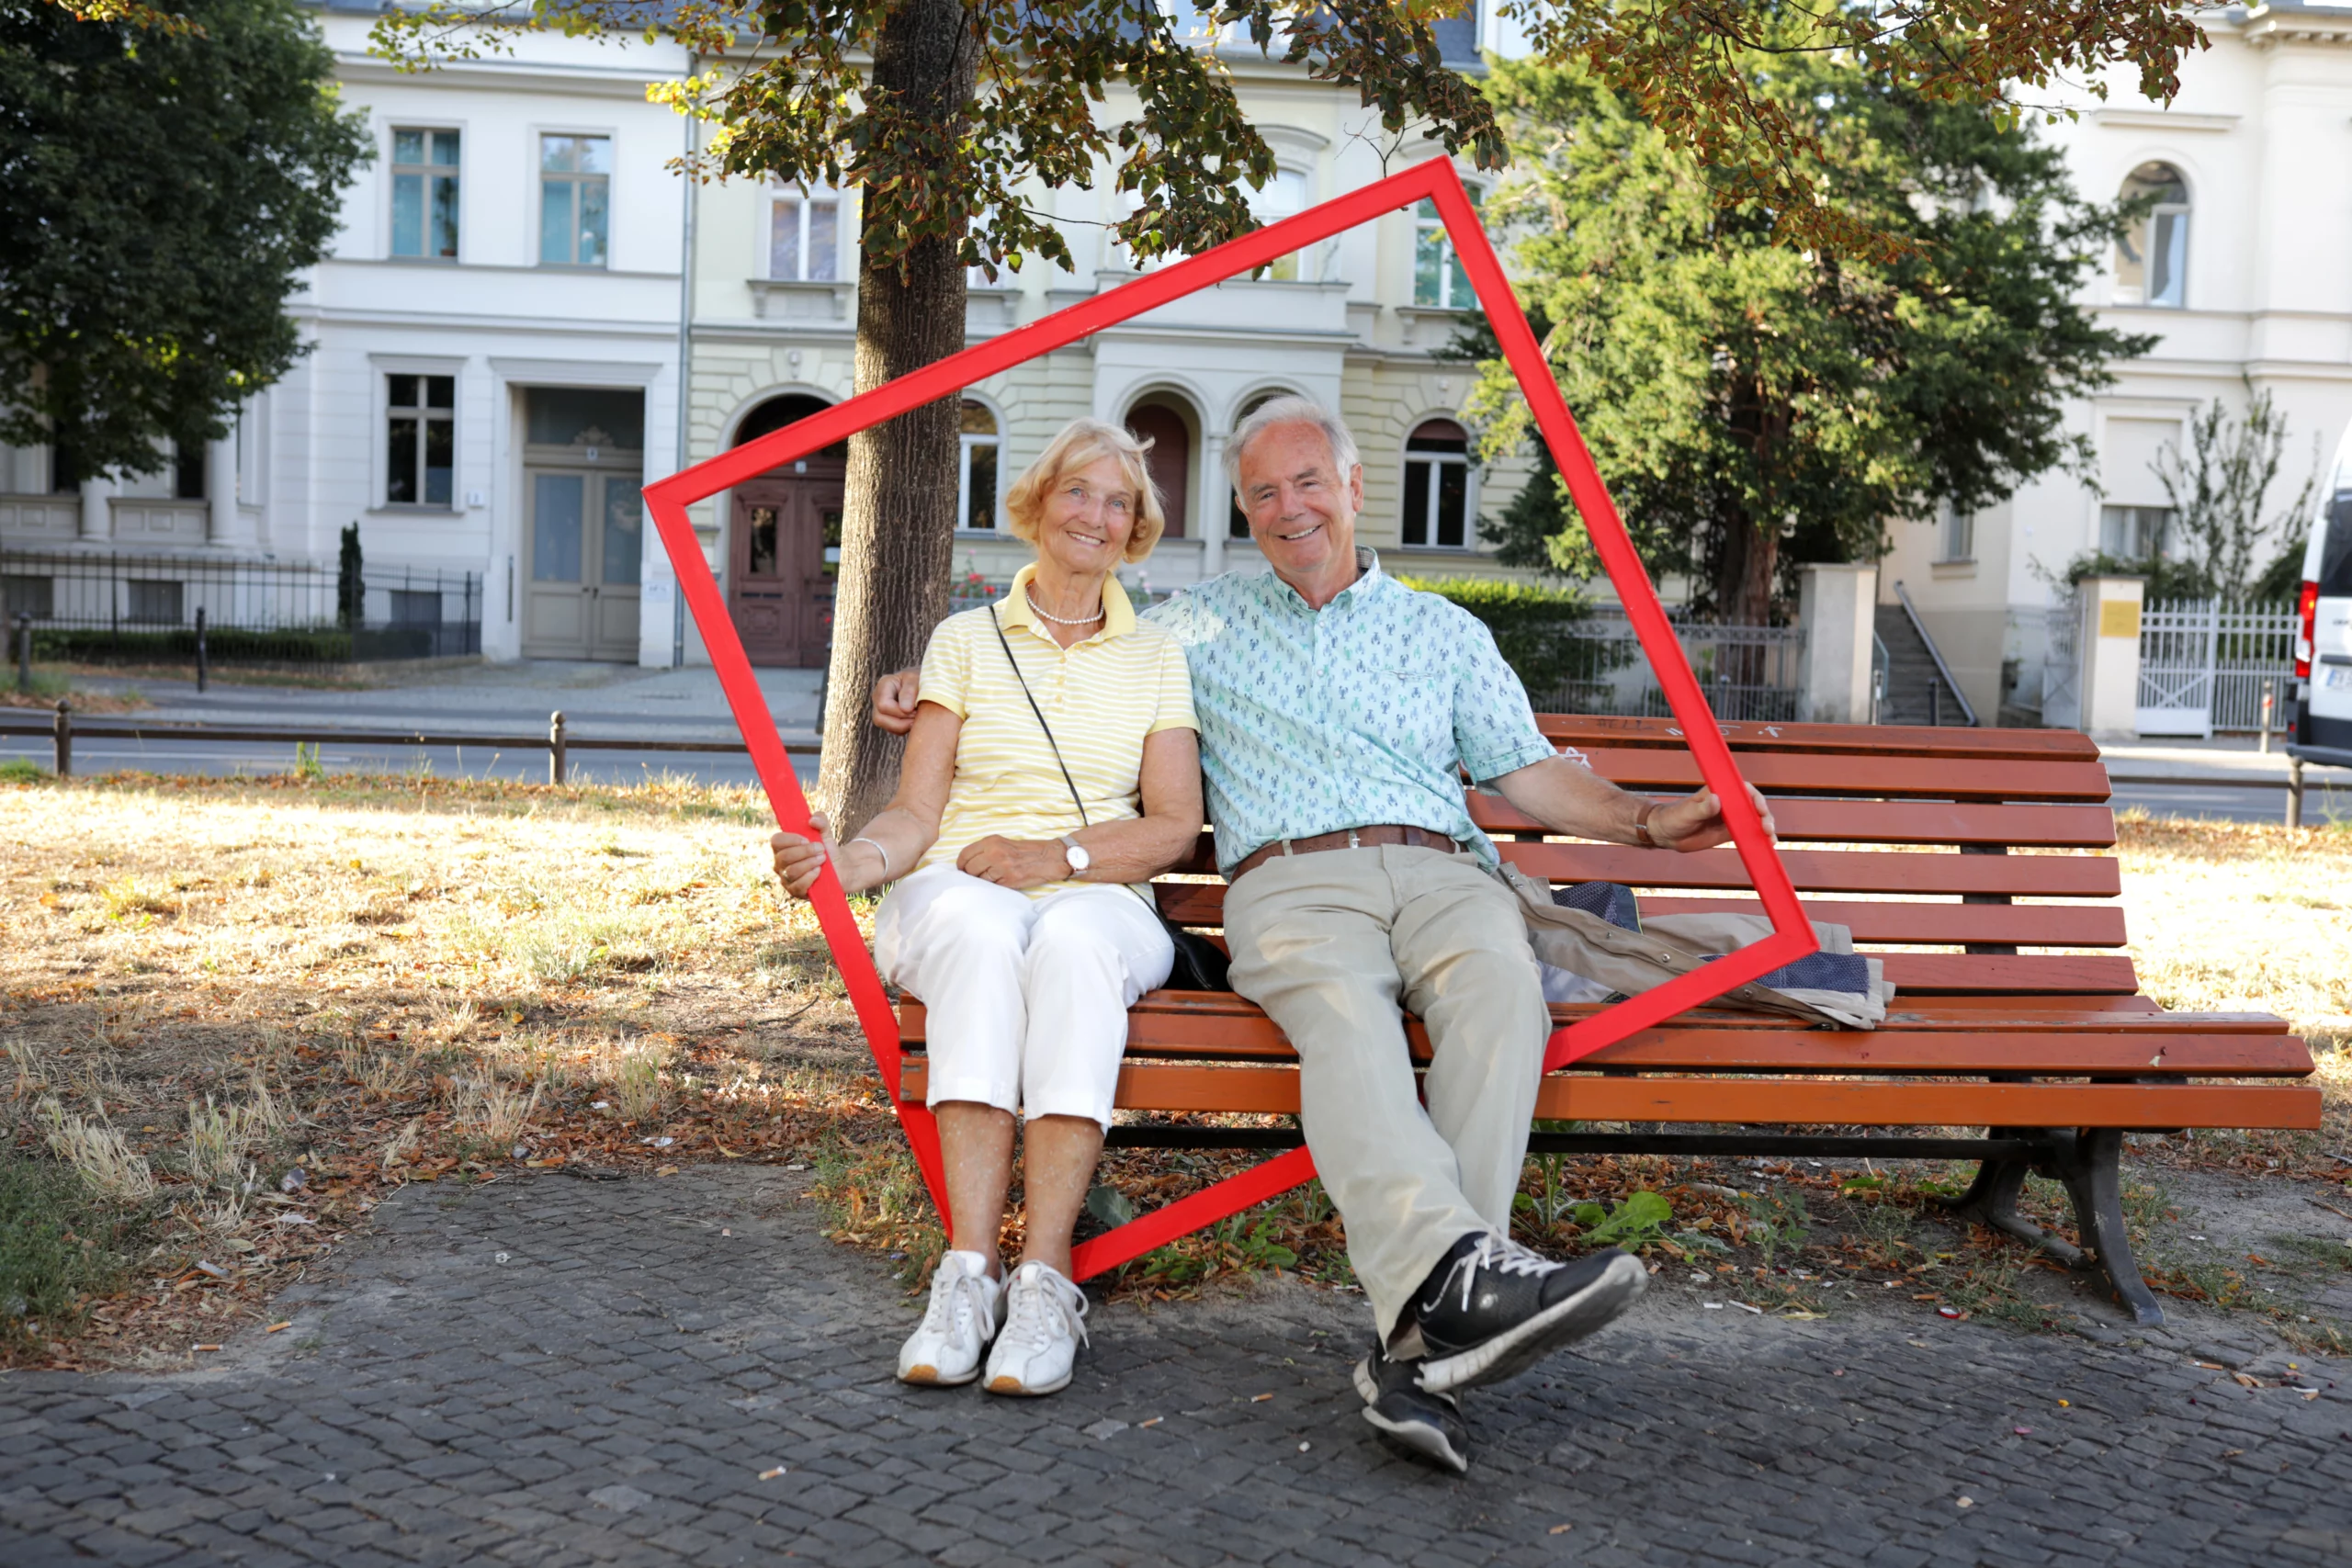 One picture shows an elderly couple in a red frame on German Unity Day.